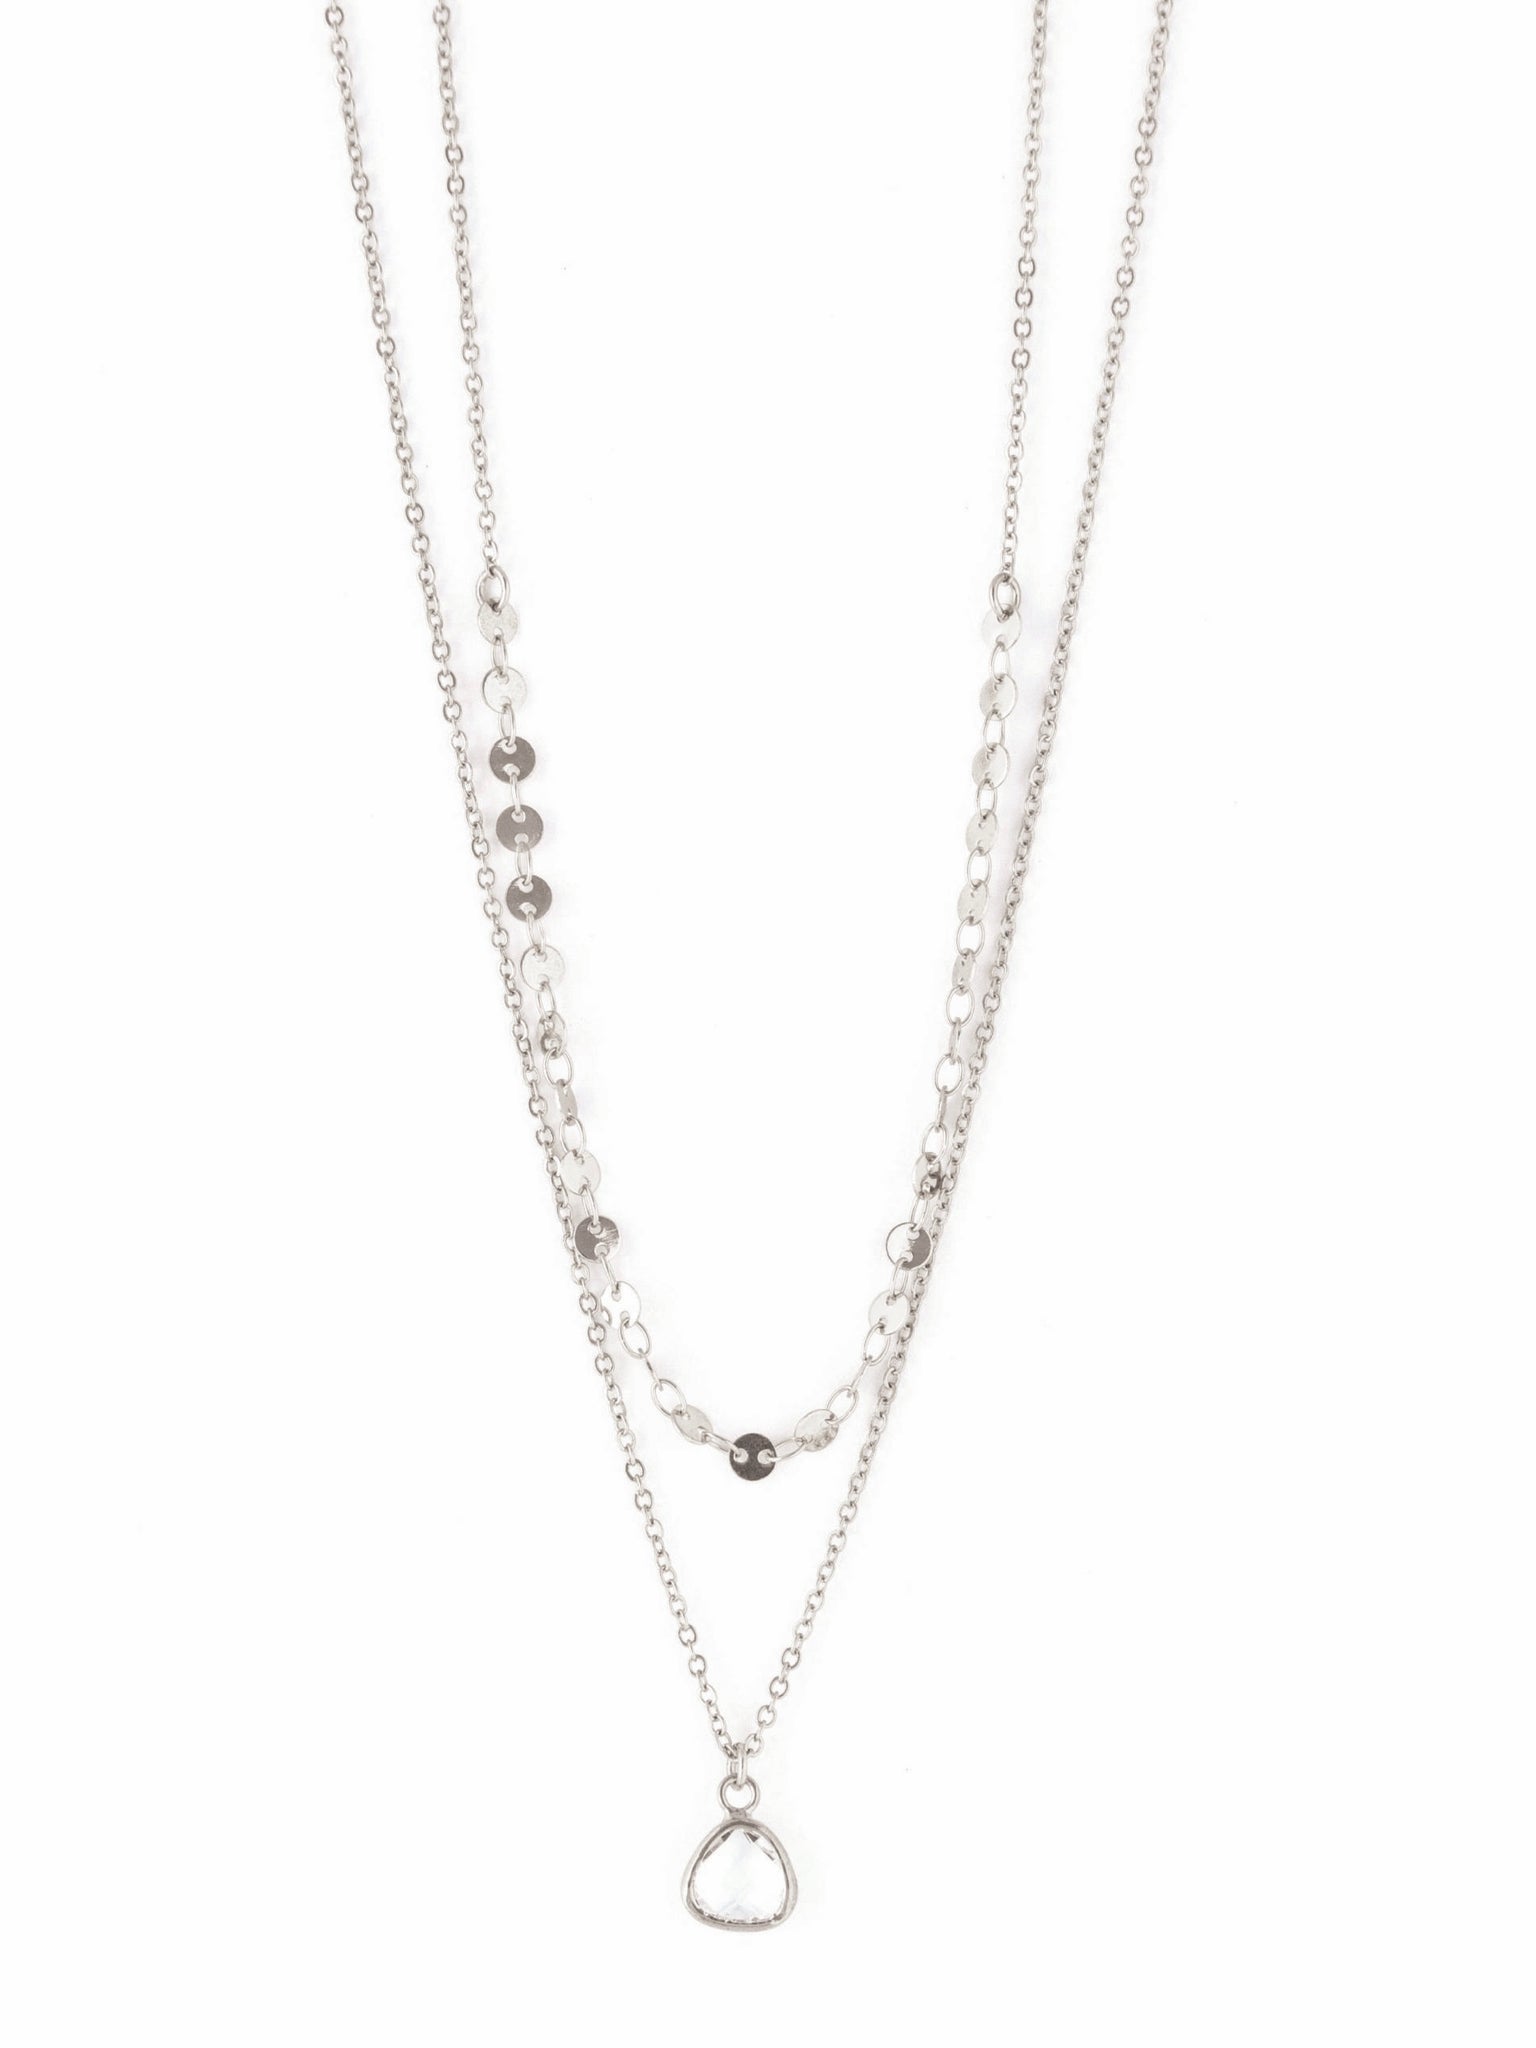 Two Layer Circle Chain & Small Clear Crystal Charm Necklace (Silver)